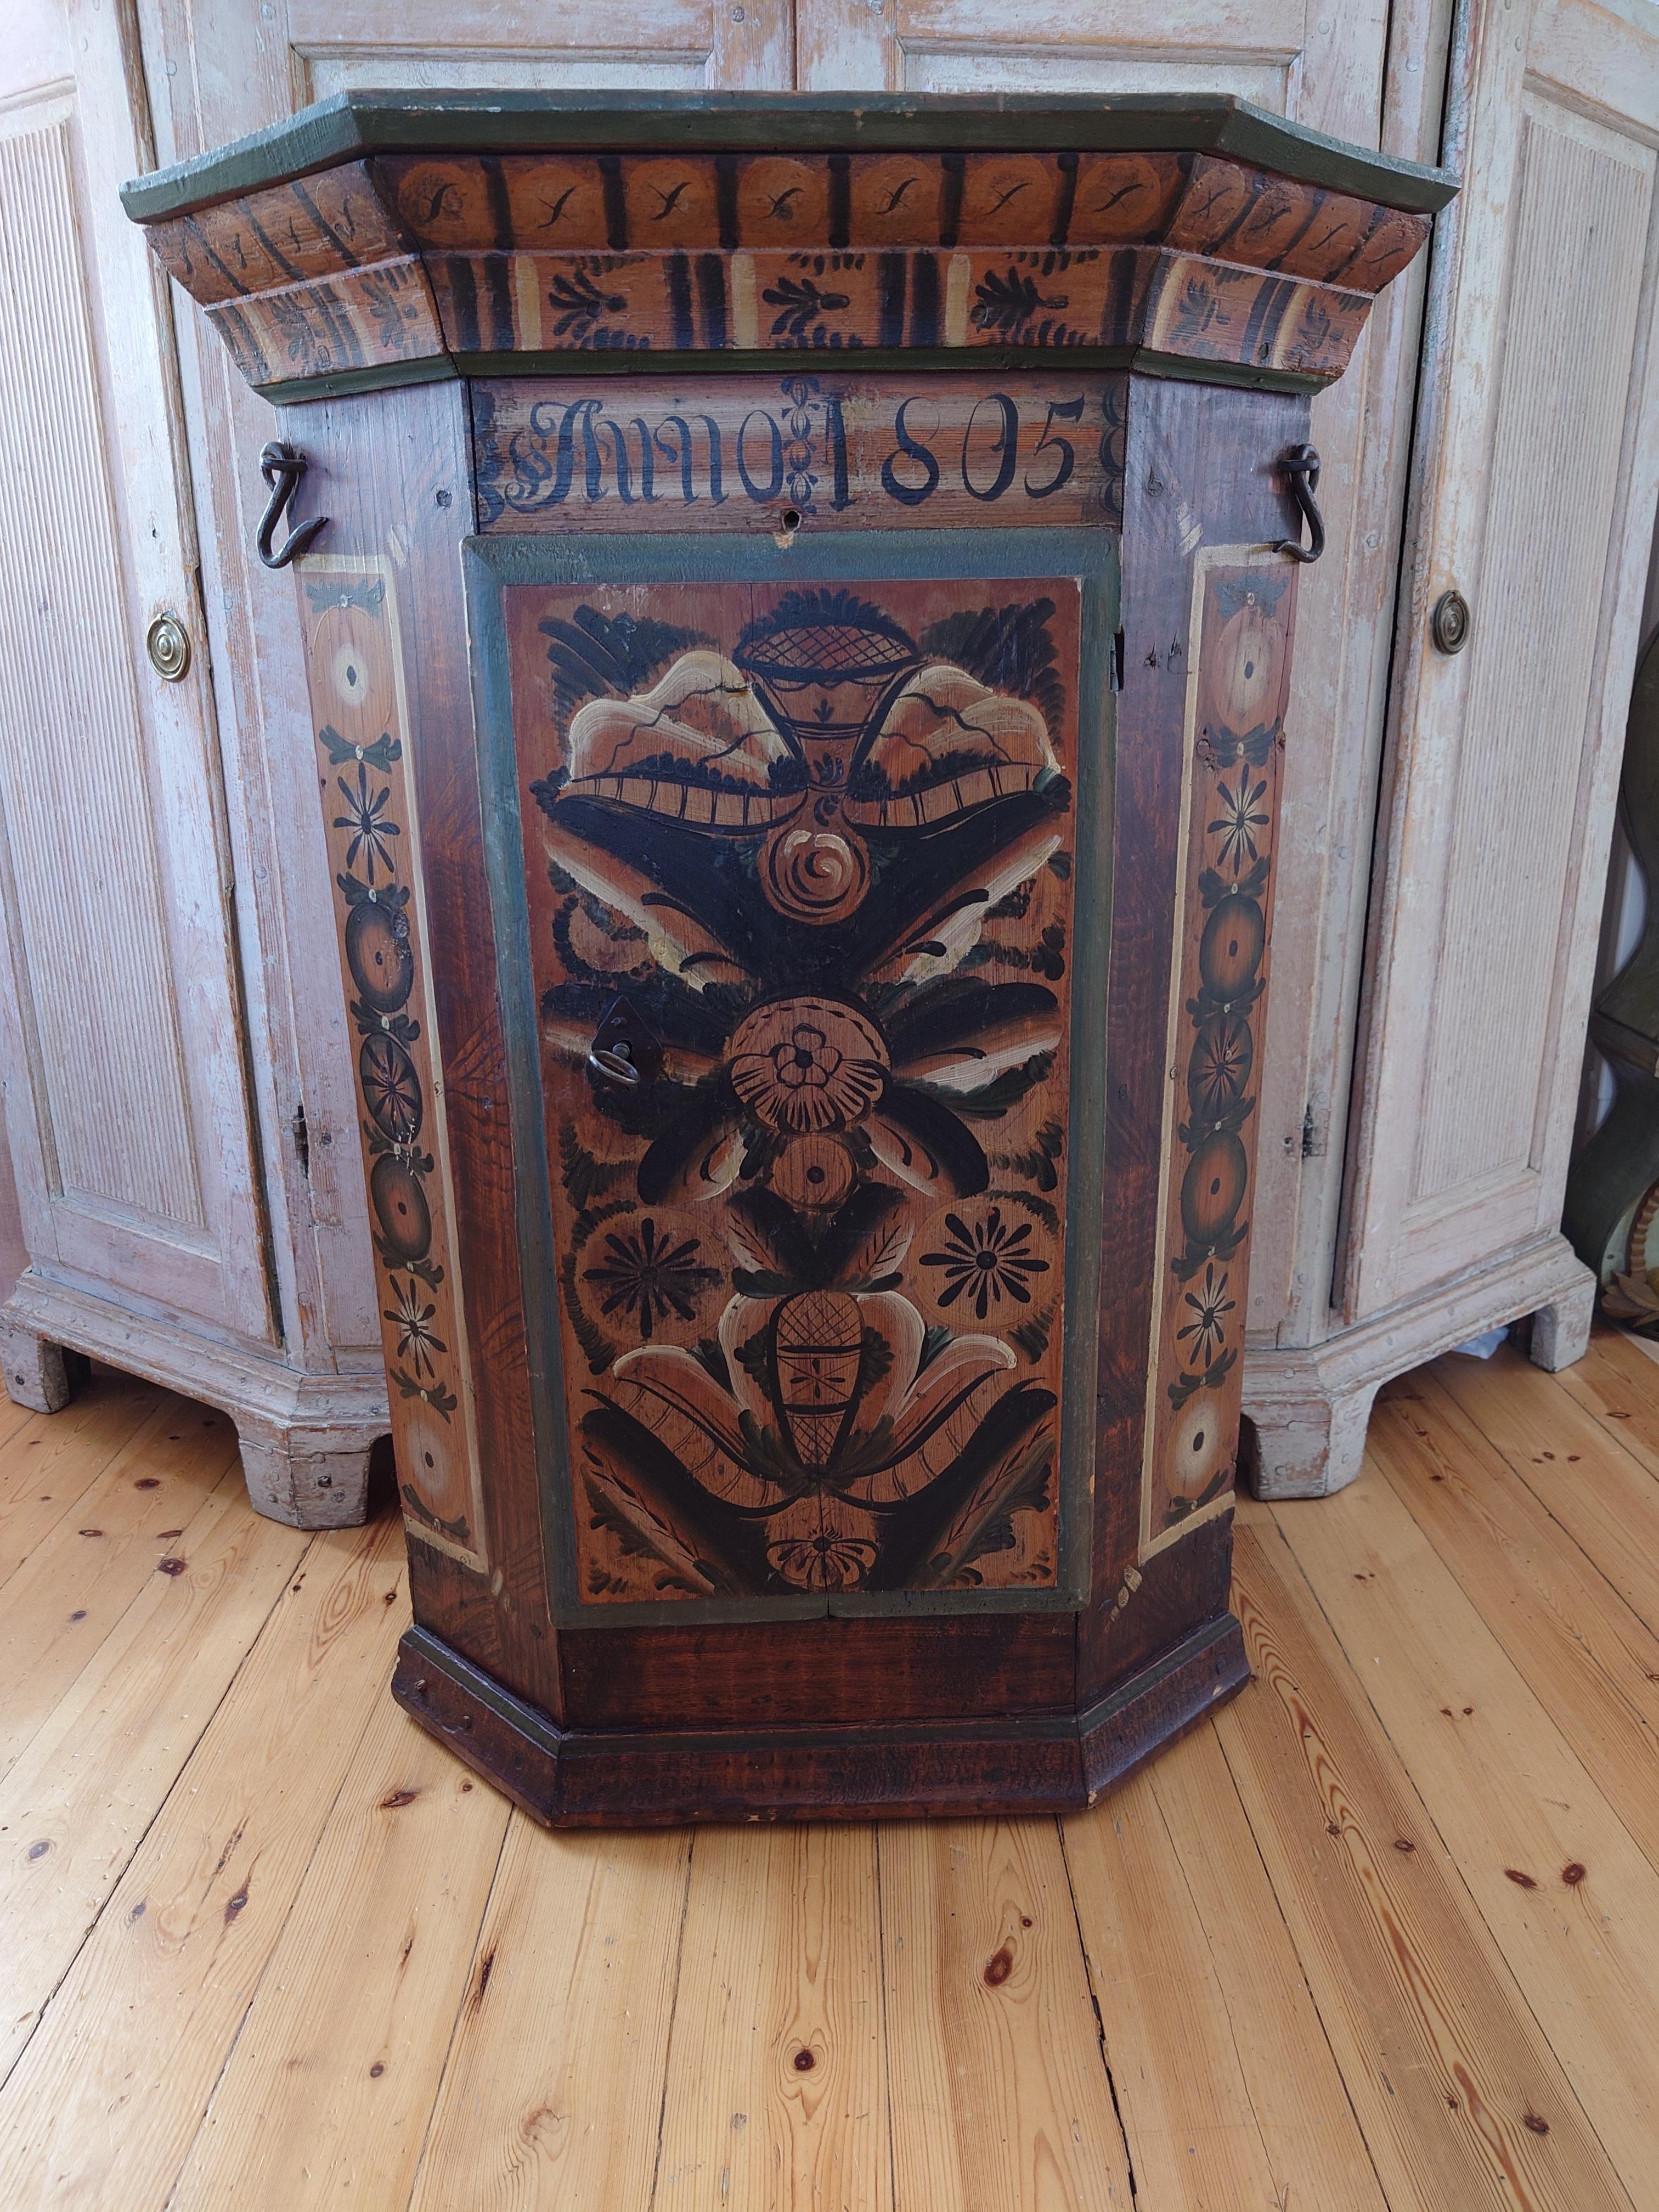 Exceptional 19th century Swedish Dalarna Folk Art Corner Cabinet painted with Kurbits  with center door, Dalarna, Sweden, inscribed and dated: Anno 1805 all original painting.

This corner cabinet, dated 1805, reflects the beautiful, naive painting